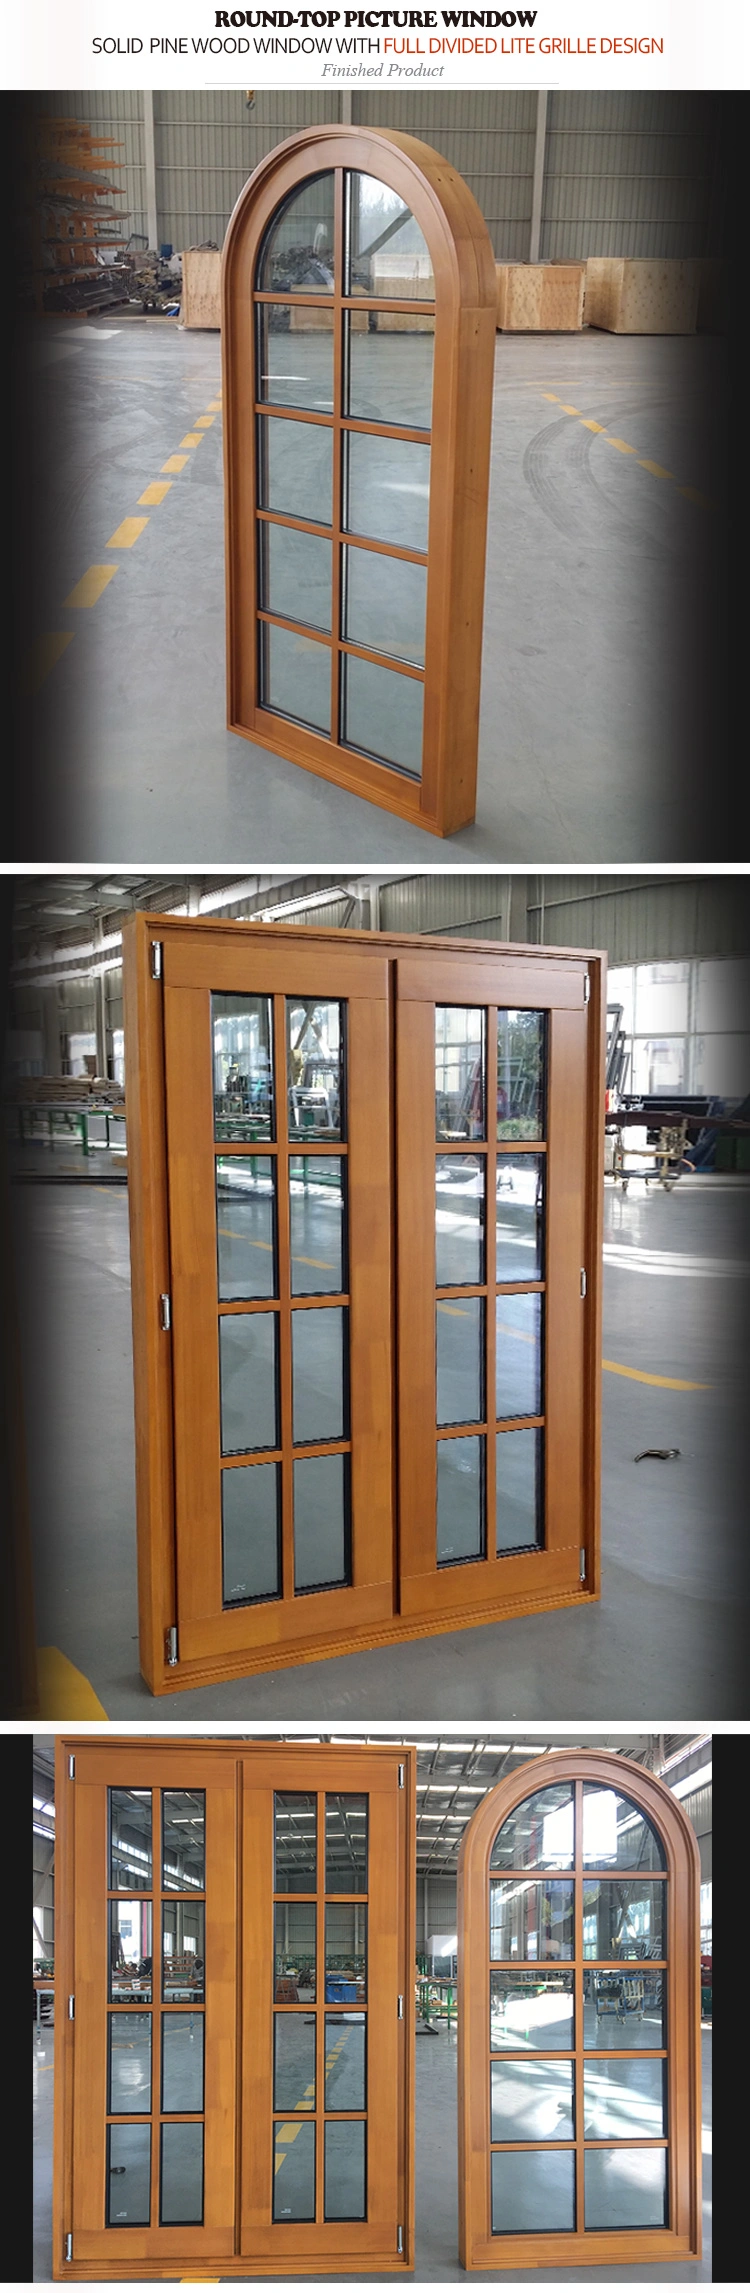 Quality Round Wood Window for Sale New Grill Design